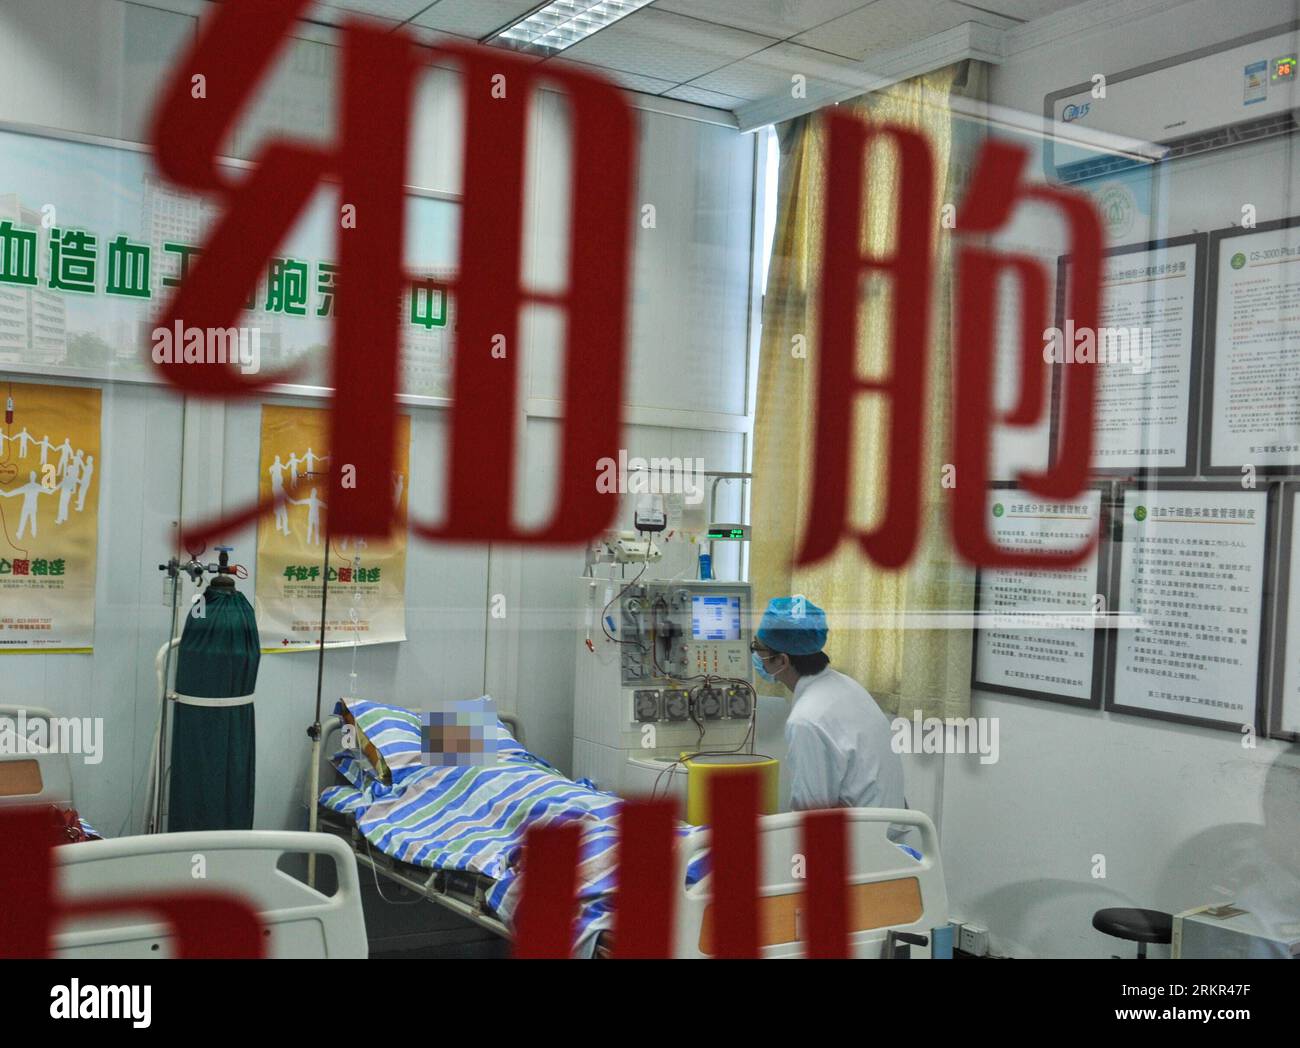 Bildnummer: 58115358  Datum: 18.06.2012  Copyright: imago/Xinhua (120618) -- CHONGQING, June 18, 2012 (Xinhua) -- A doctor withdraws stem cells from the prisoner father surnamed Gao to save his son Jun Jie at Xinqiao Hospital in Chongqing, southwest China, June 14, 2012. A family is facing an anxious wait to see whether a bone marrow transplant, made possible by the incarcerated father s rare trans-provincial prison transfer, has saved their son s life. PUBLICATIONxNOTxINxCHN Gesellschaft Fotostory Leukämie Medizin Knochenmarkspende Stammzellen Stammzellentherapie Spende xjh x2x 2012 quer Stock Photo